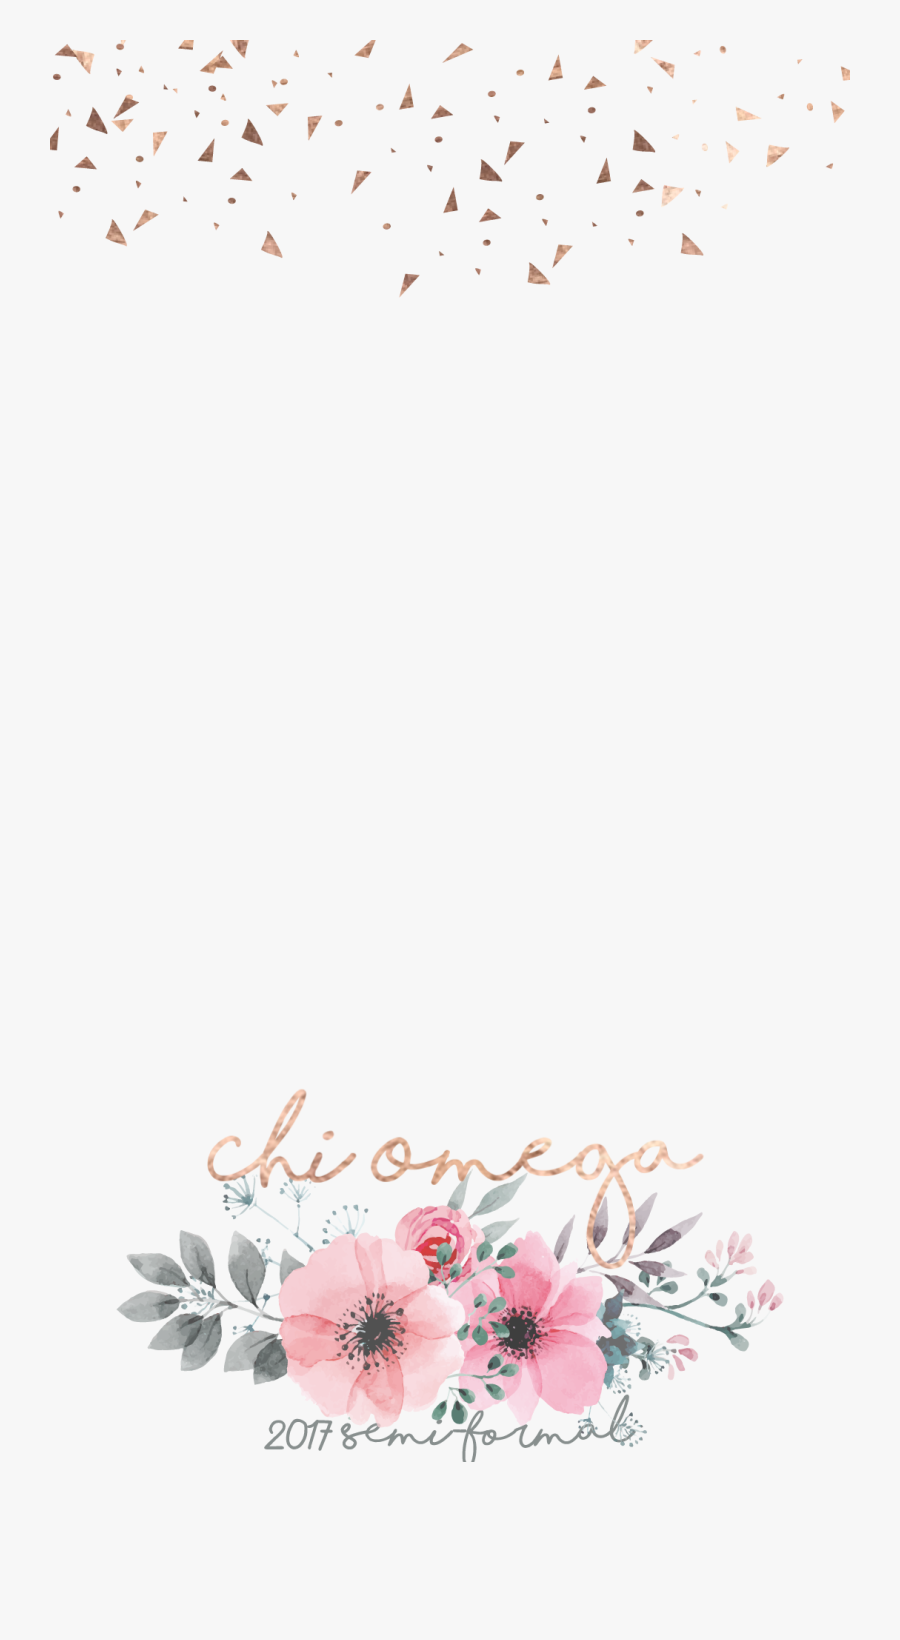 Snapchat Filters Clipart Formal - Snapchat Flower Frame, Transparent Clipart